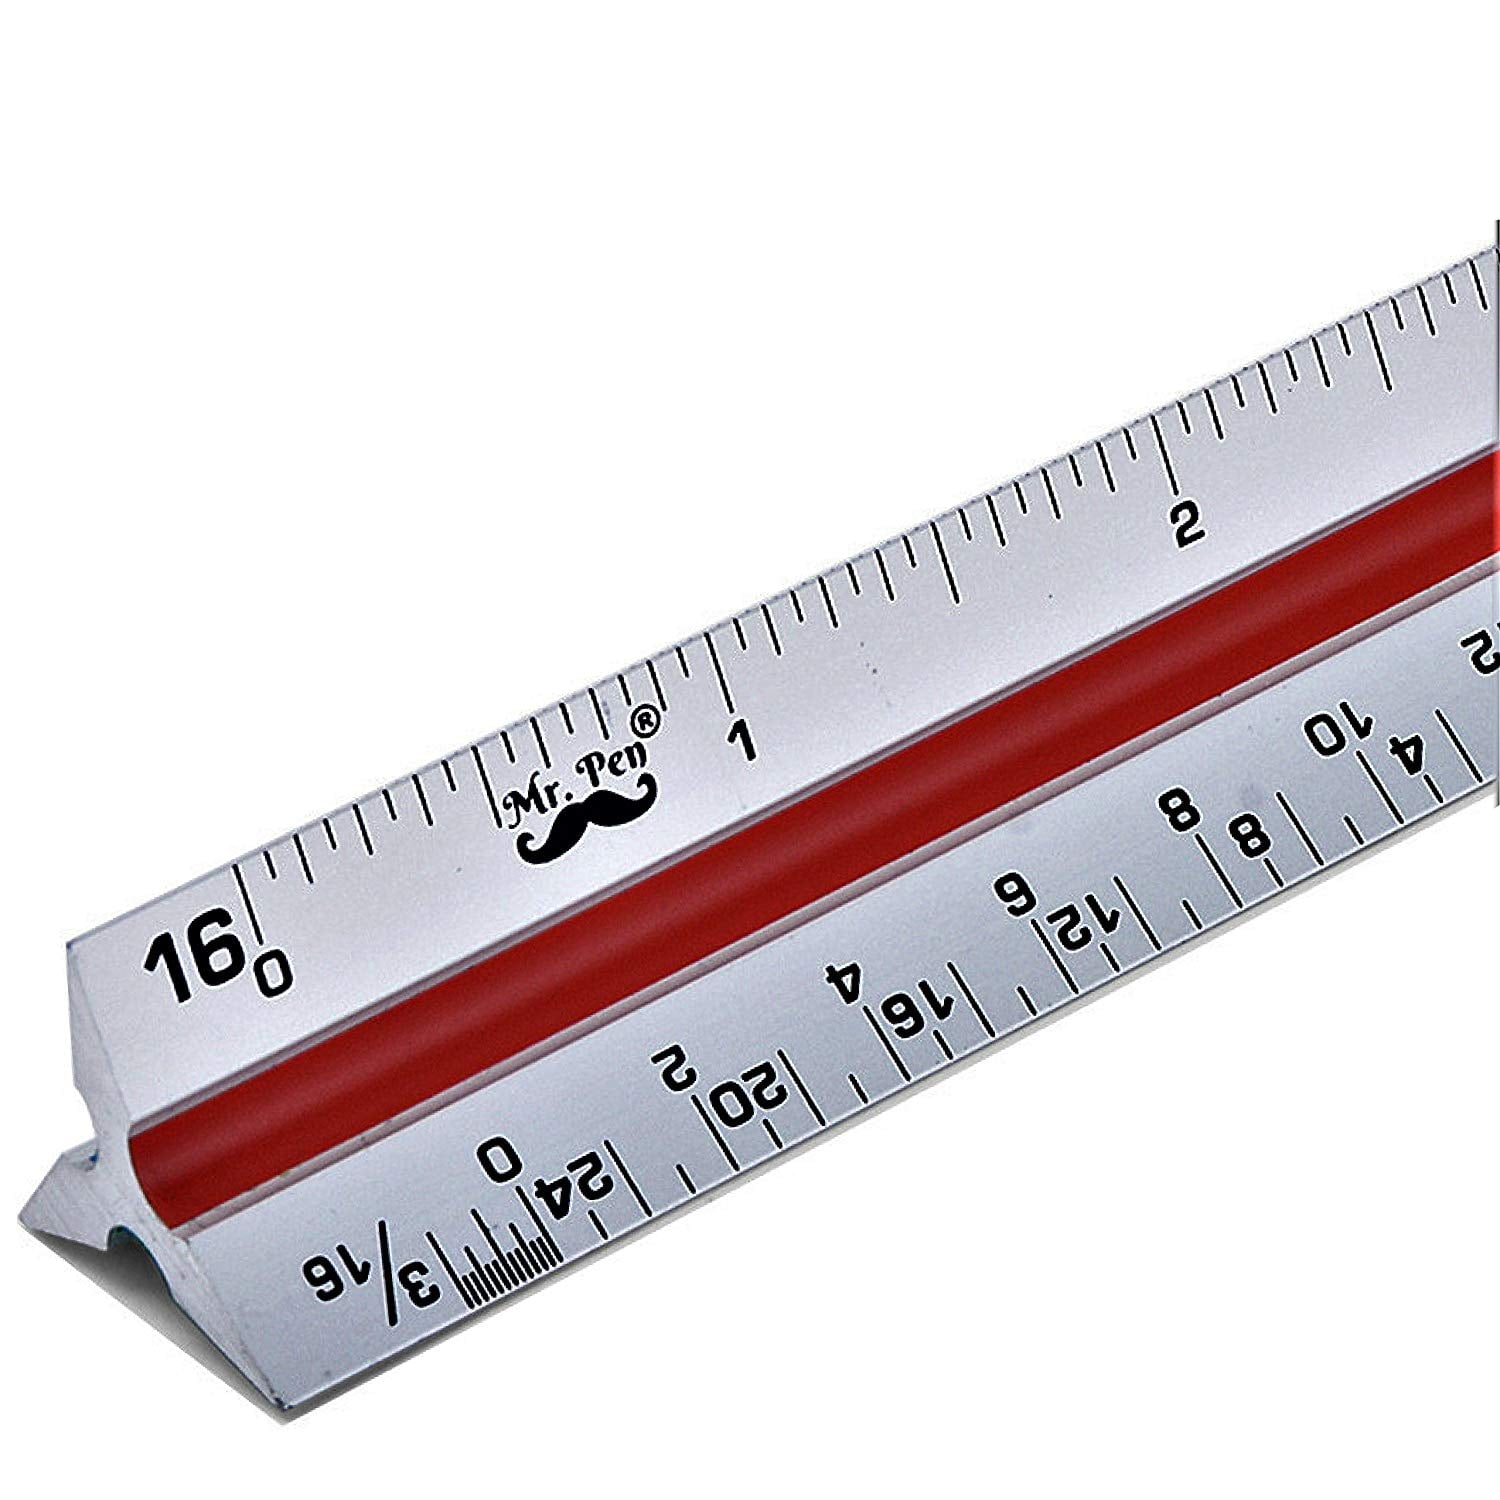 6 Architect Triangular Scale Ruler Engineering,Aluminum Architectural Drafting Scale Ruler,Metric Measurements Scale Ruler 